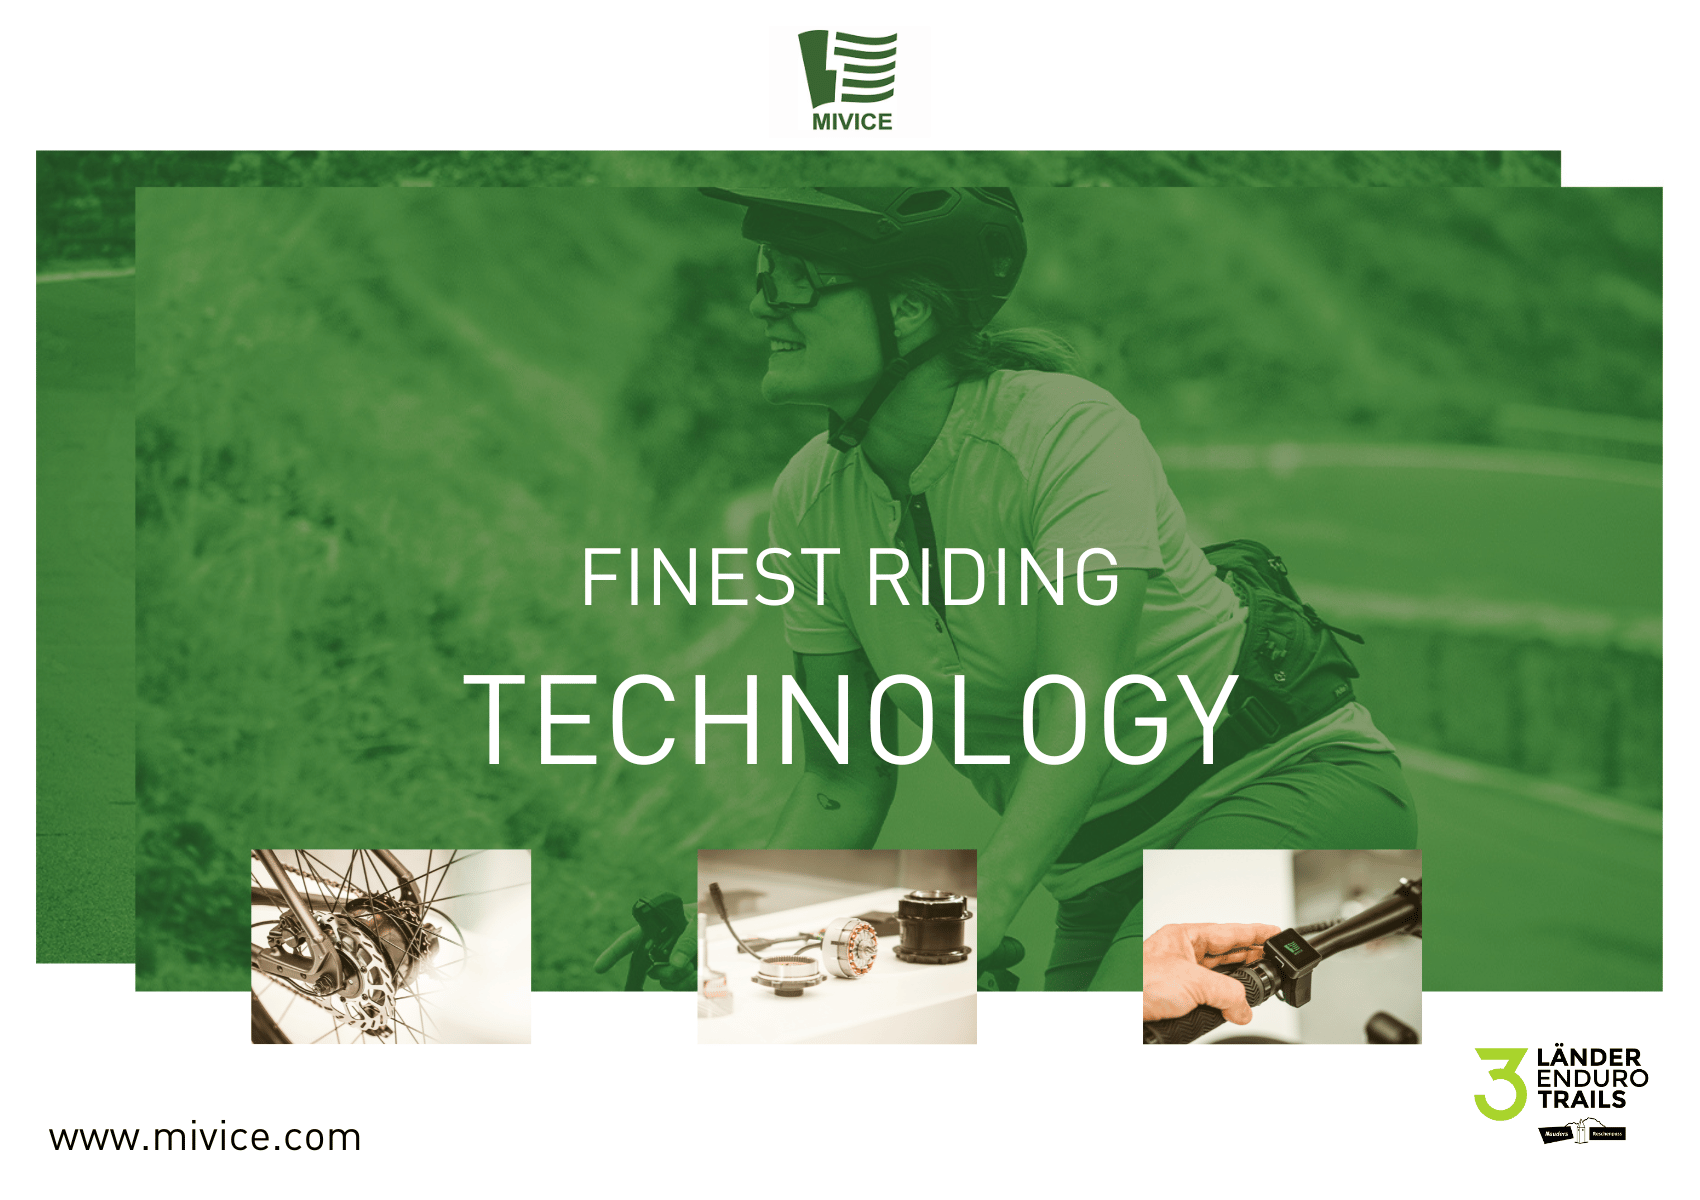 Mivice: Finest Riding Technology